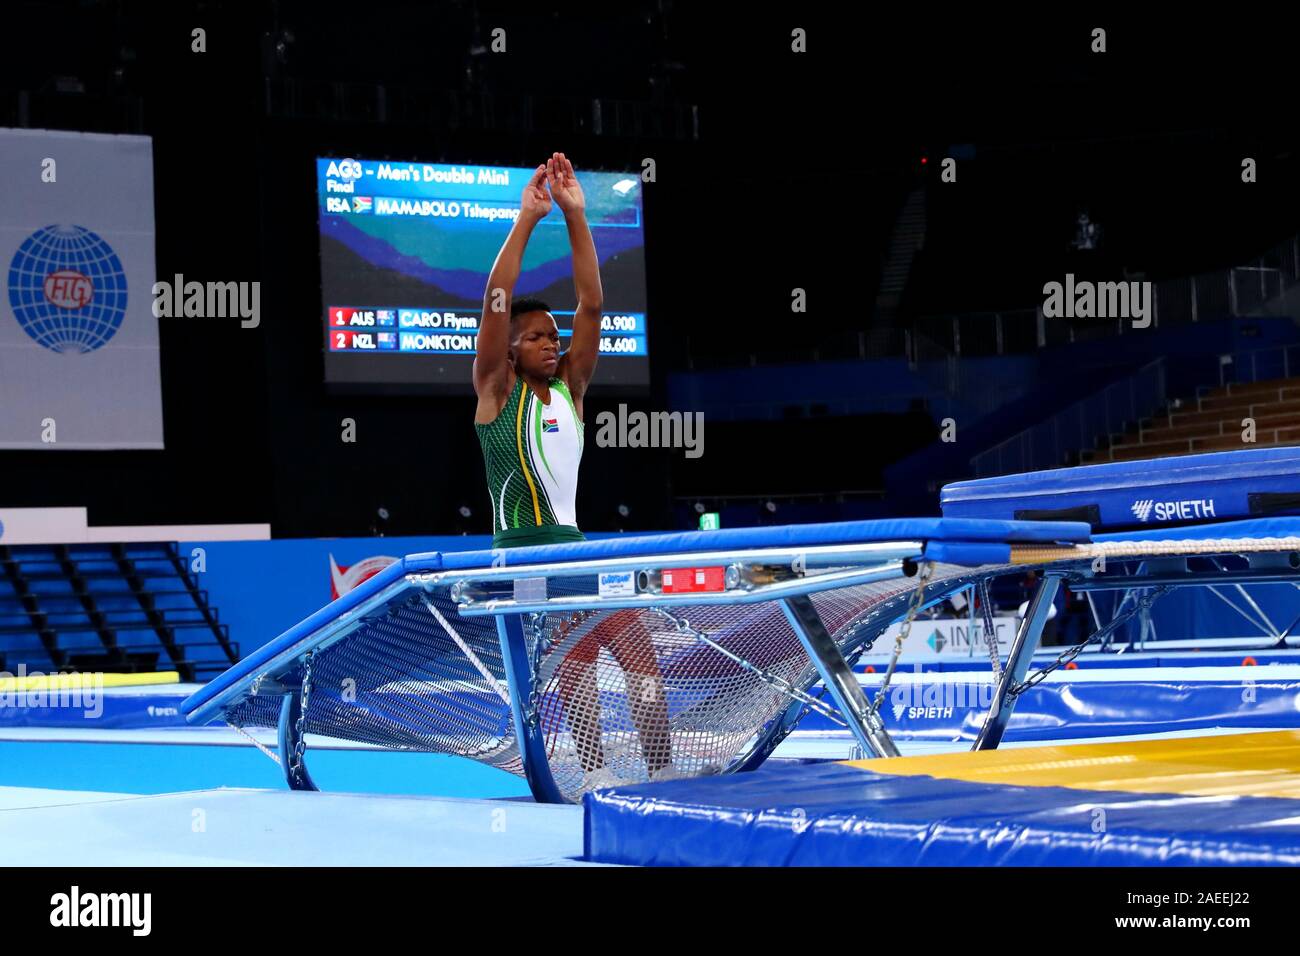 Tokyo, Japan. 8th Dec, 2019. Tshepang Mamabolo (RSA), December 8, 2019 -  Trampoline : 27th FIG Trampoline Gymnastics World Age Group Competitions,  Men's Double Mini (ages of 15-16) Final at Ariake Gymnastics